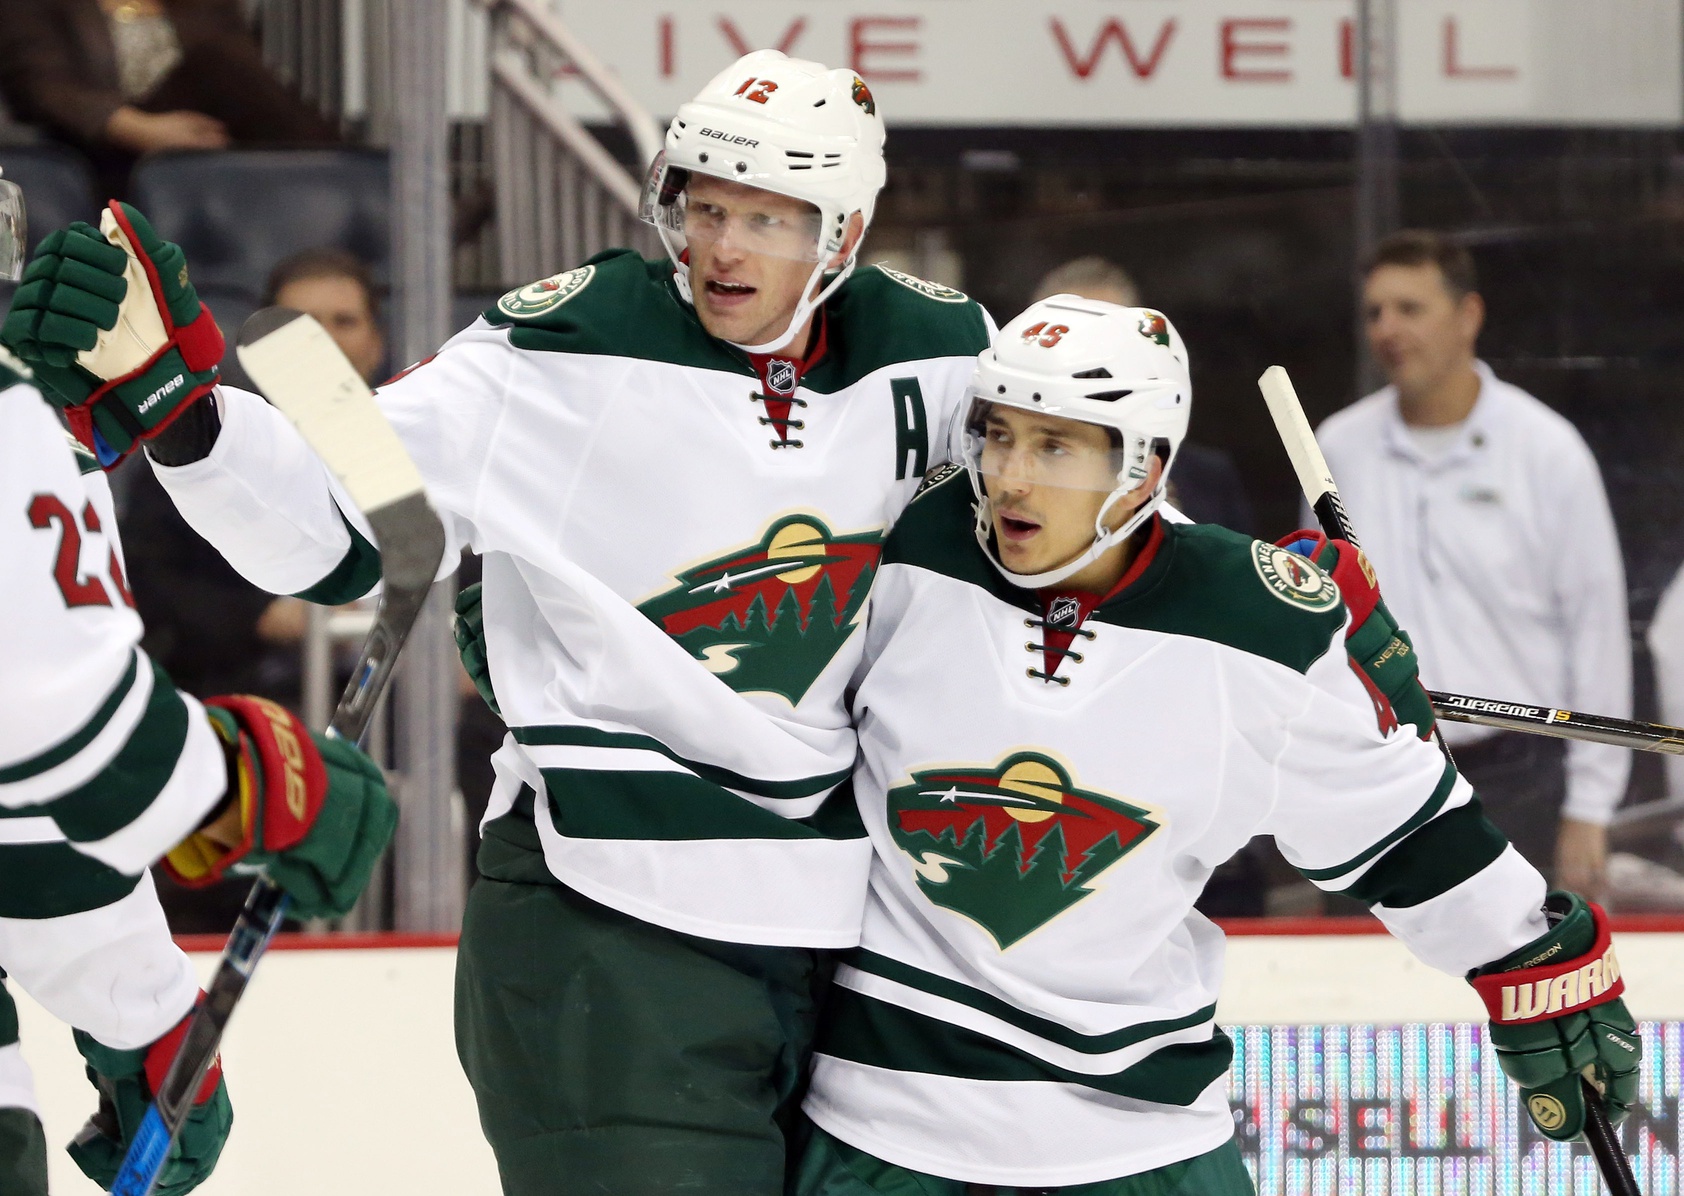 Acquired for defense, Wild's Jake Middleton contributes on